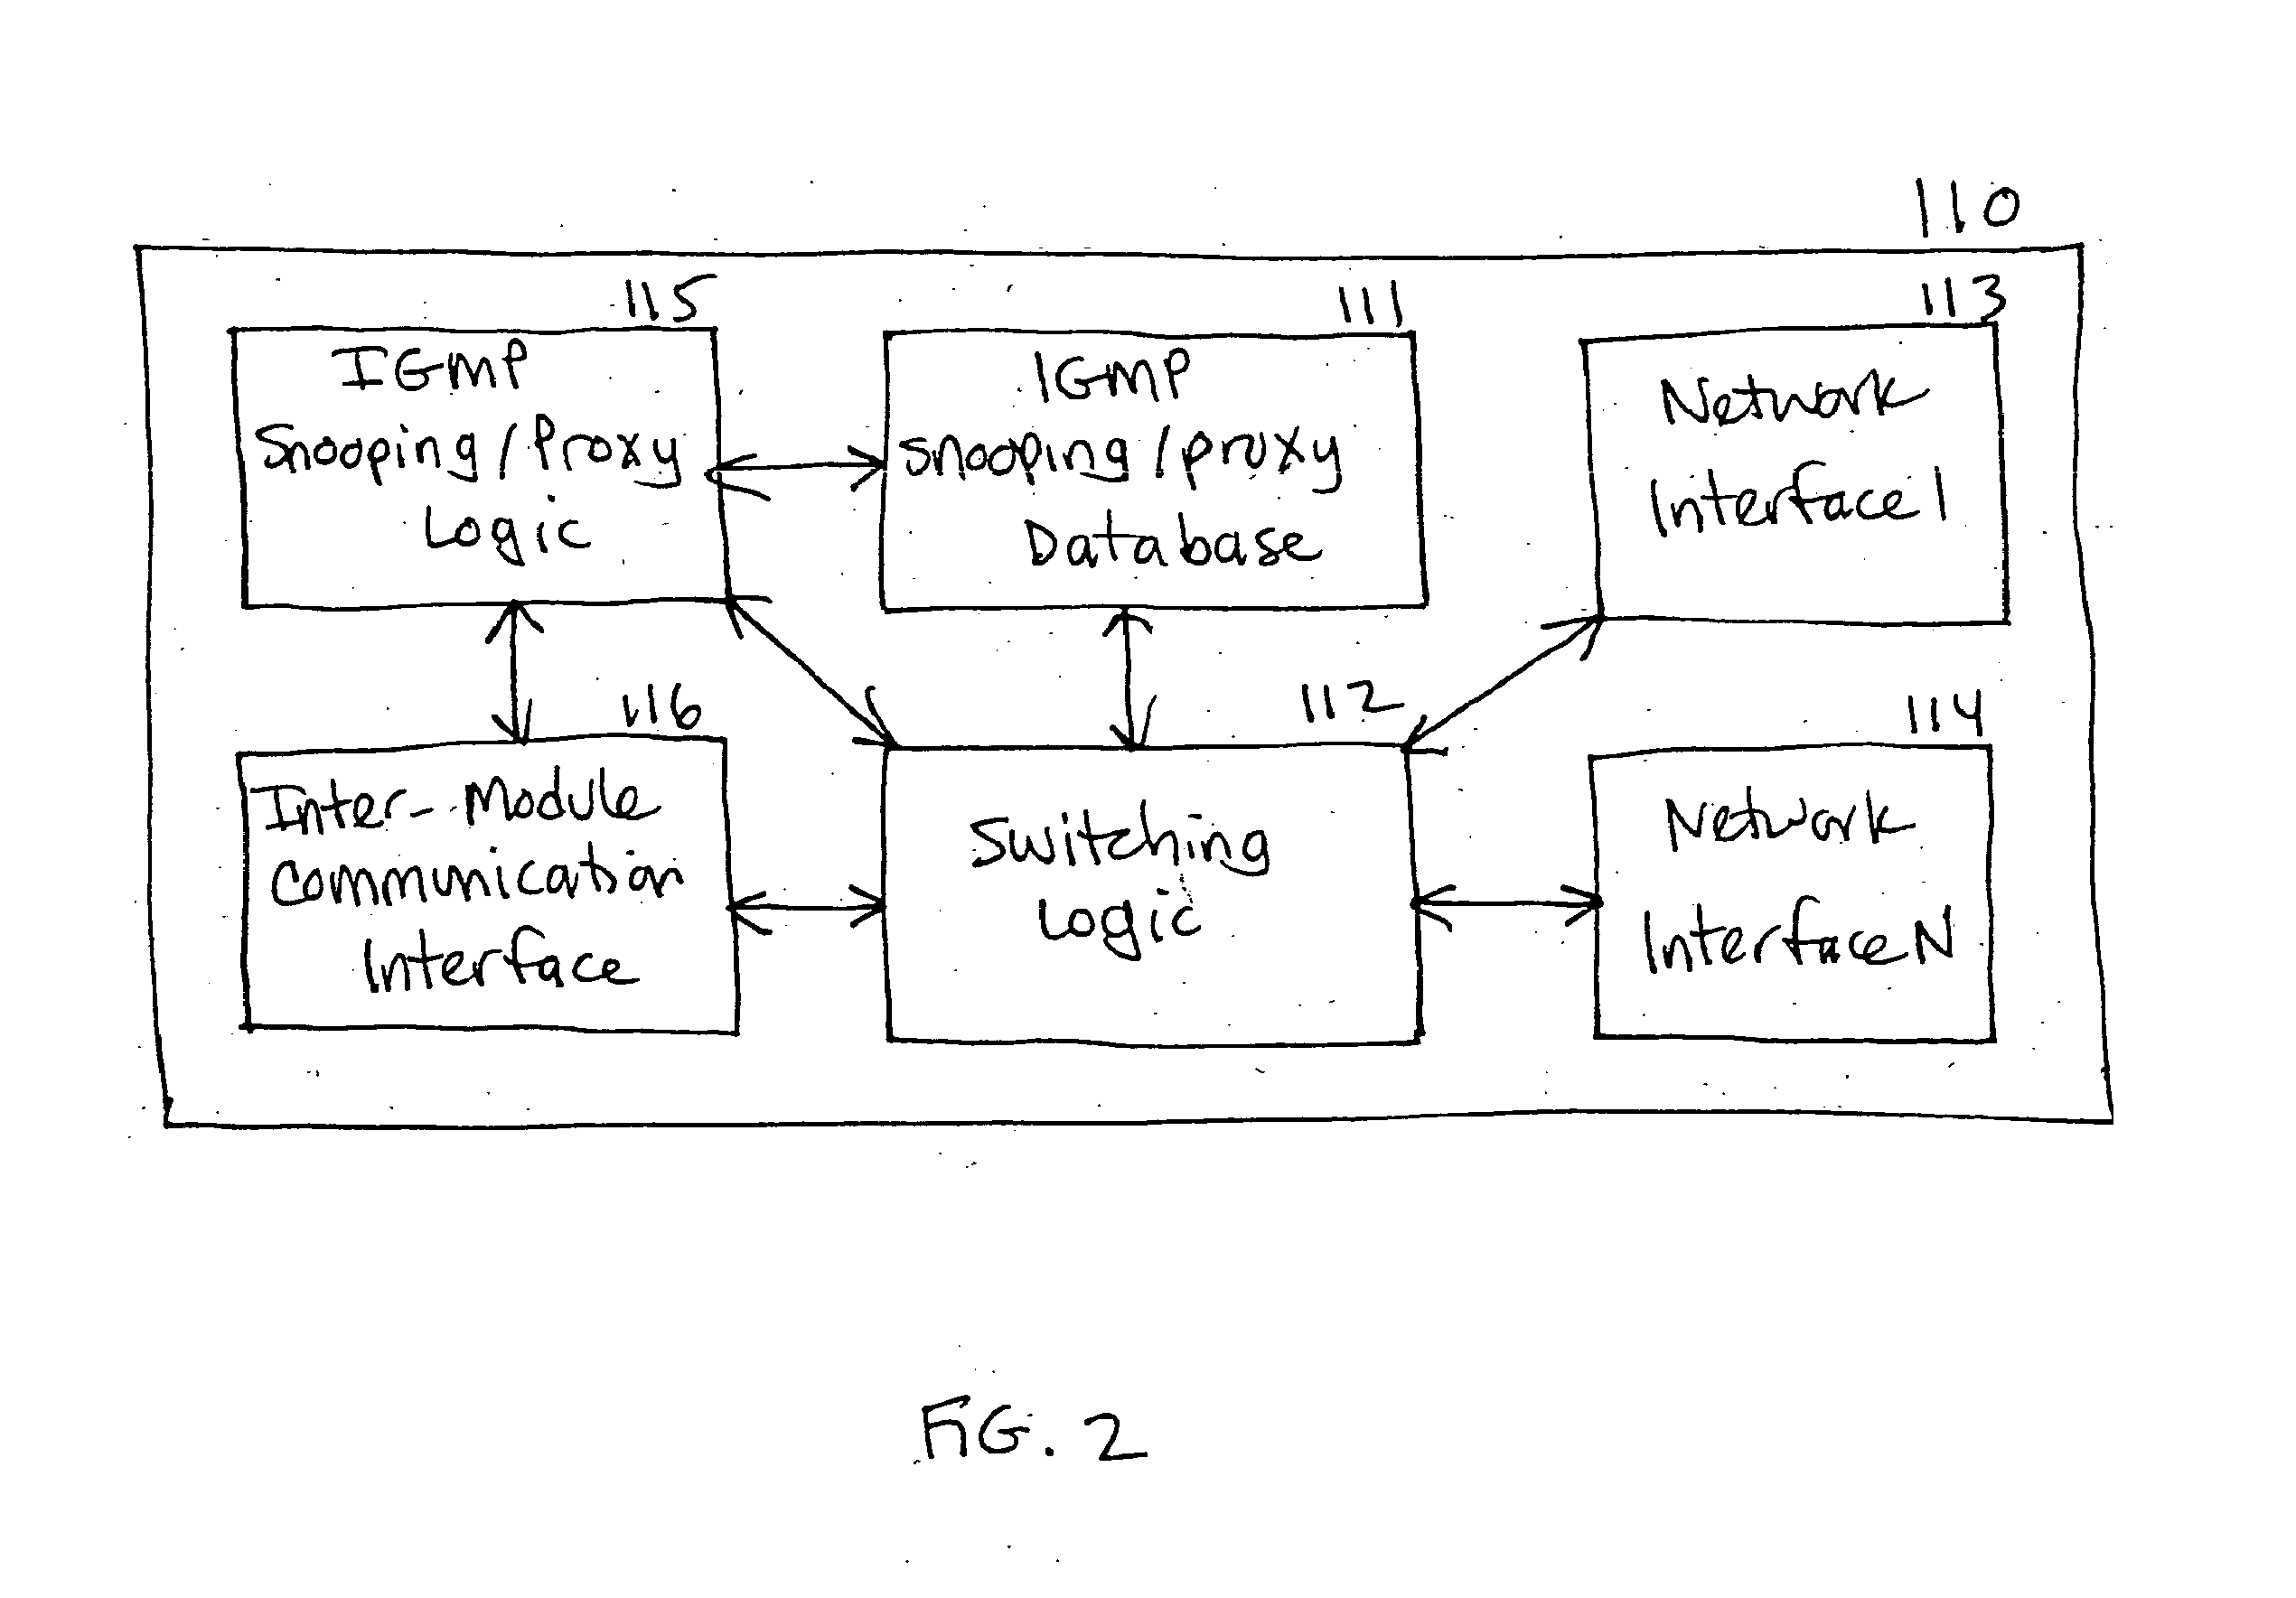 Multicast switching in a distributed communication system